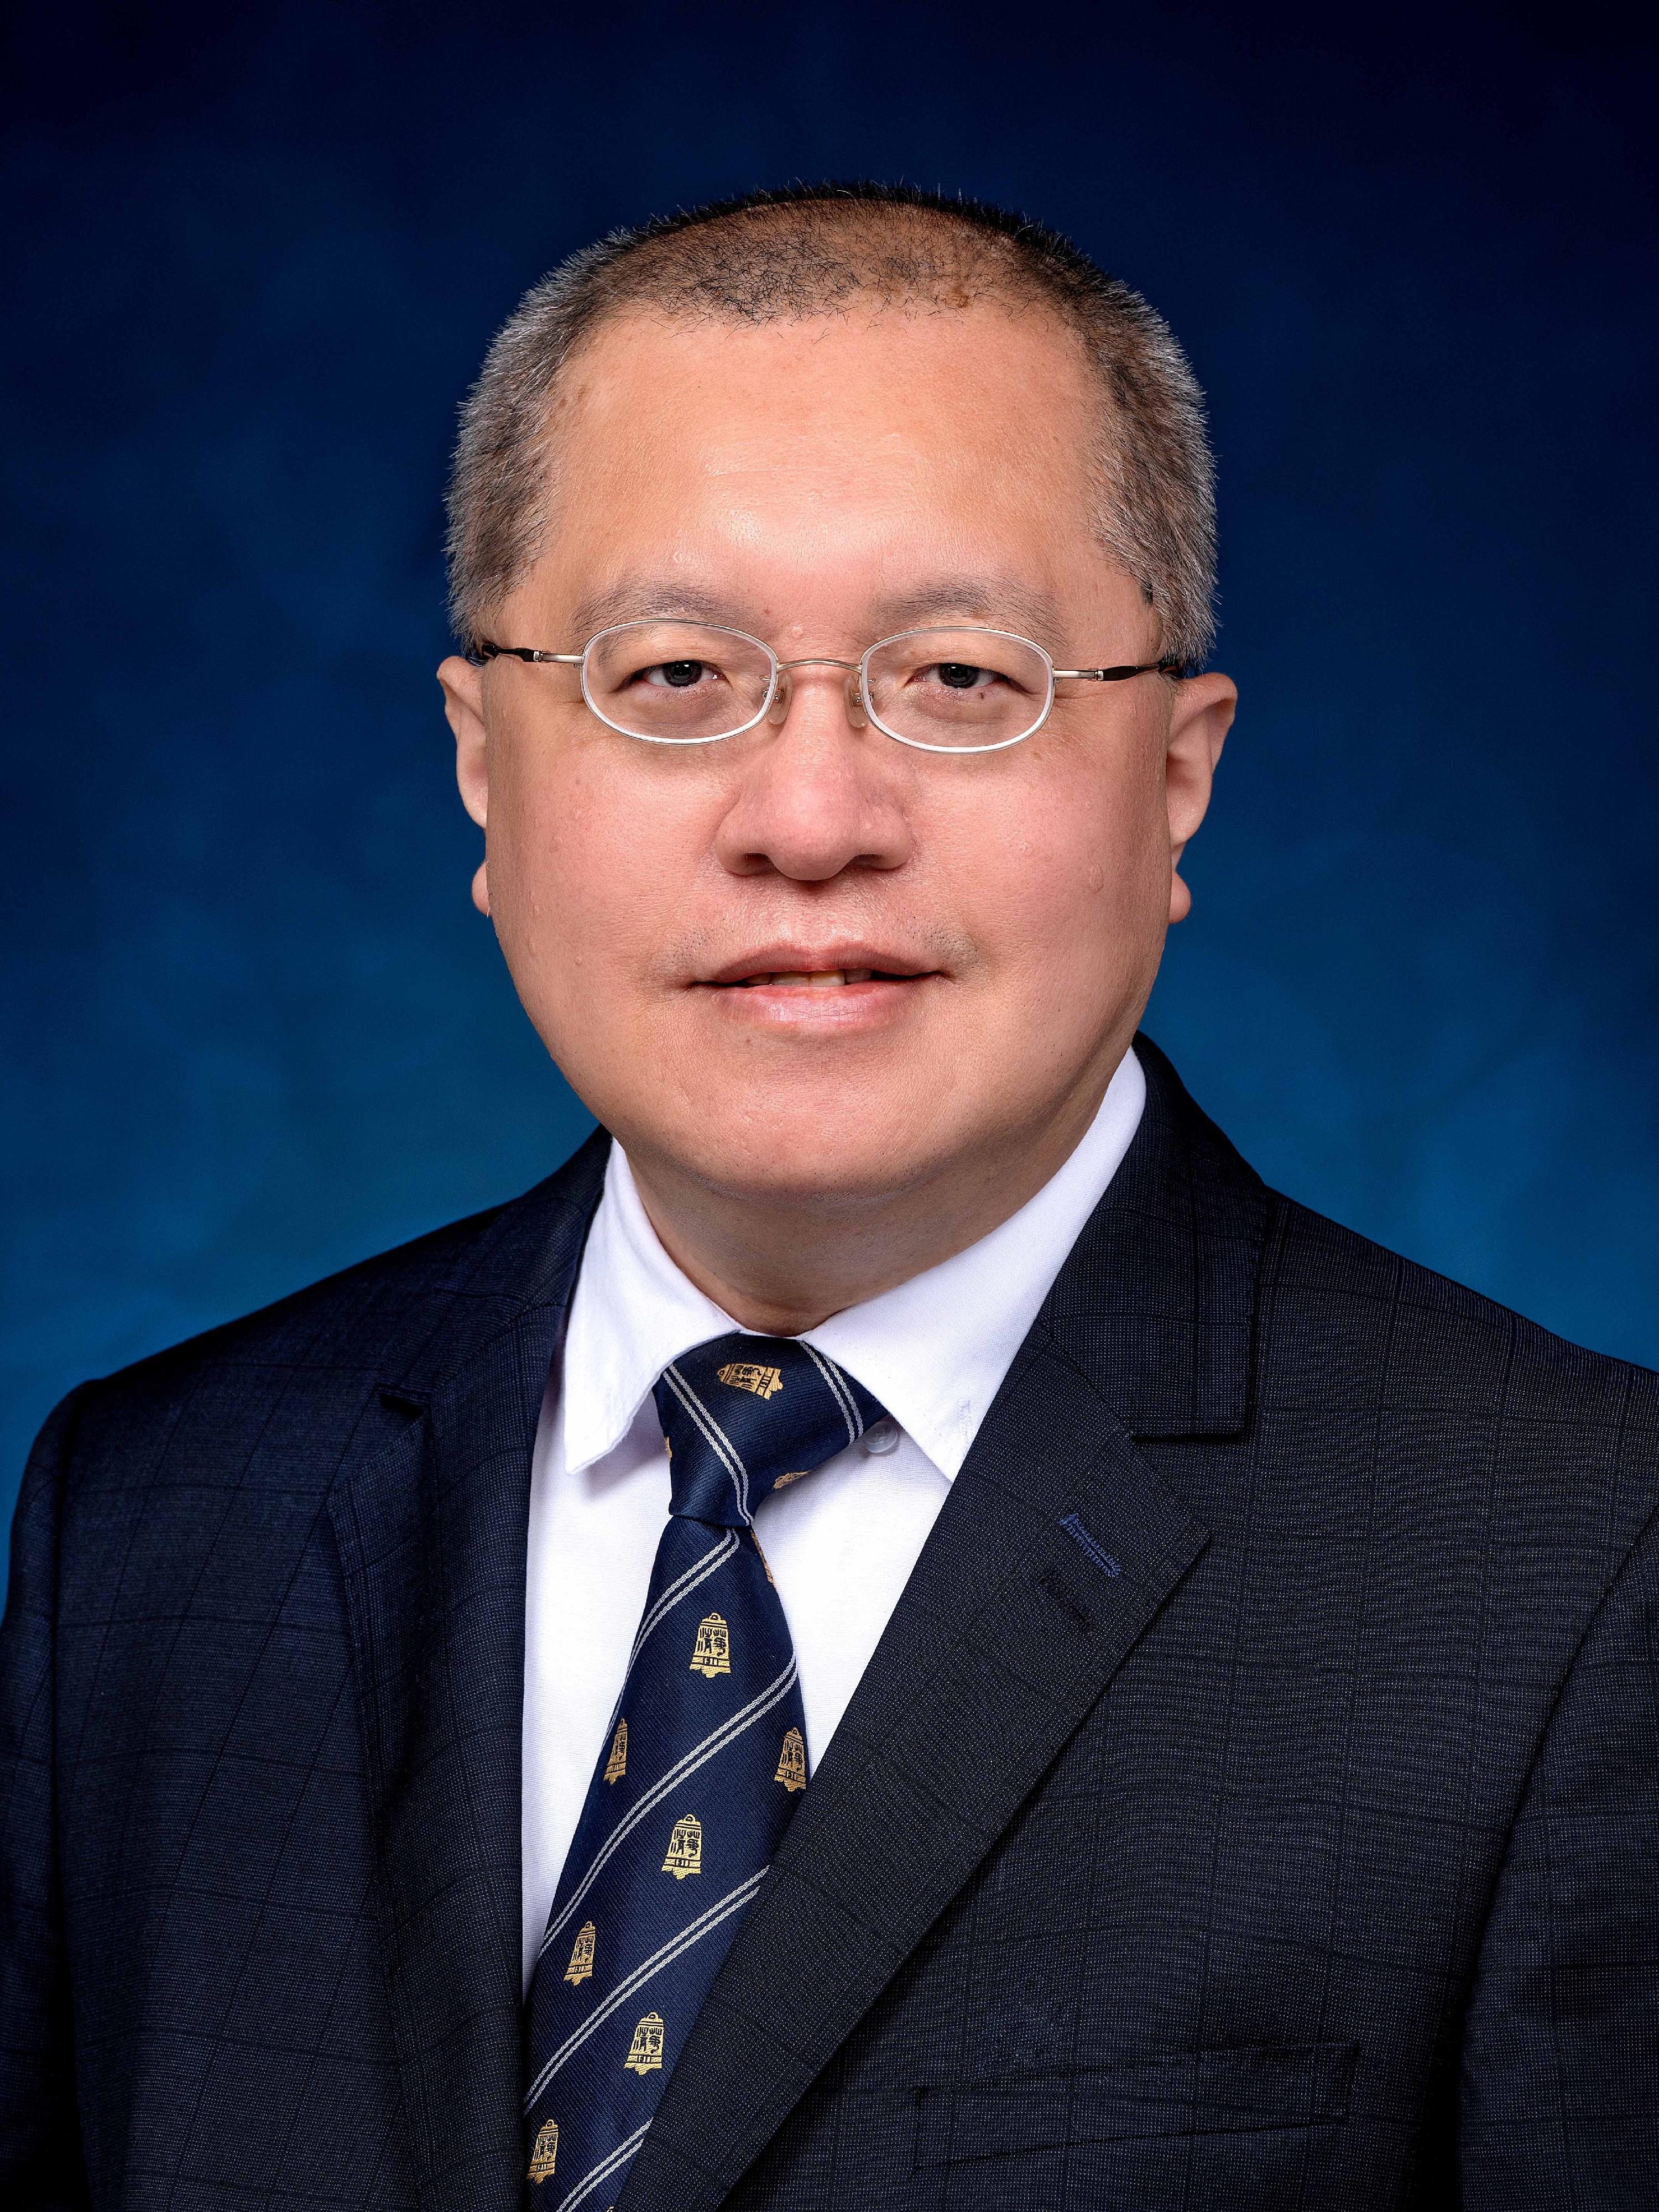 Mr Chan Pak-wai, Assistant Director of the Hong Kong Observatory, will take up the post of Director of the Hong Kong Observatory on March 13, 2023.